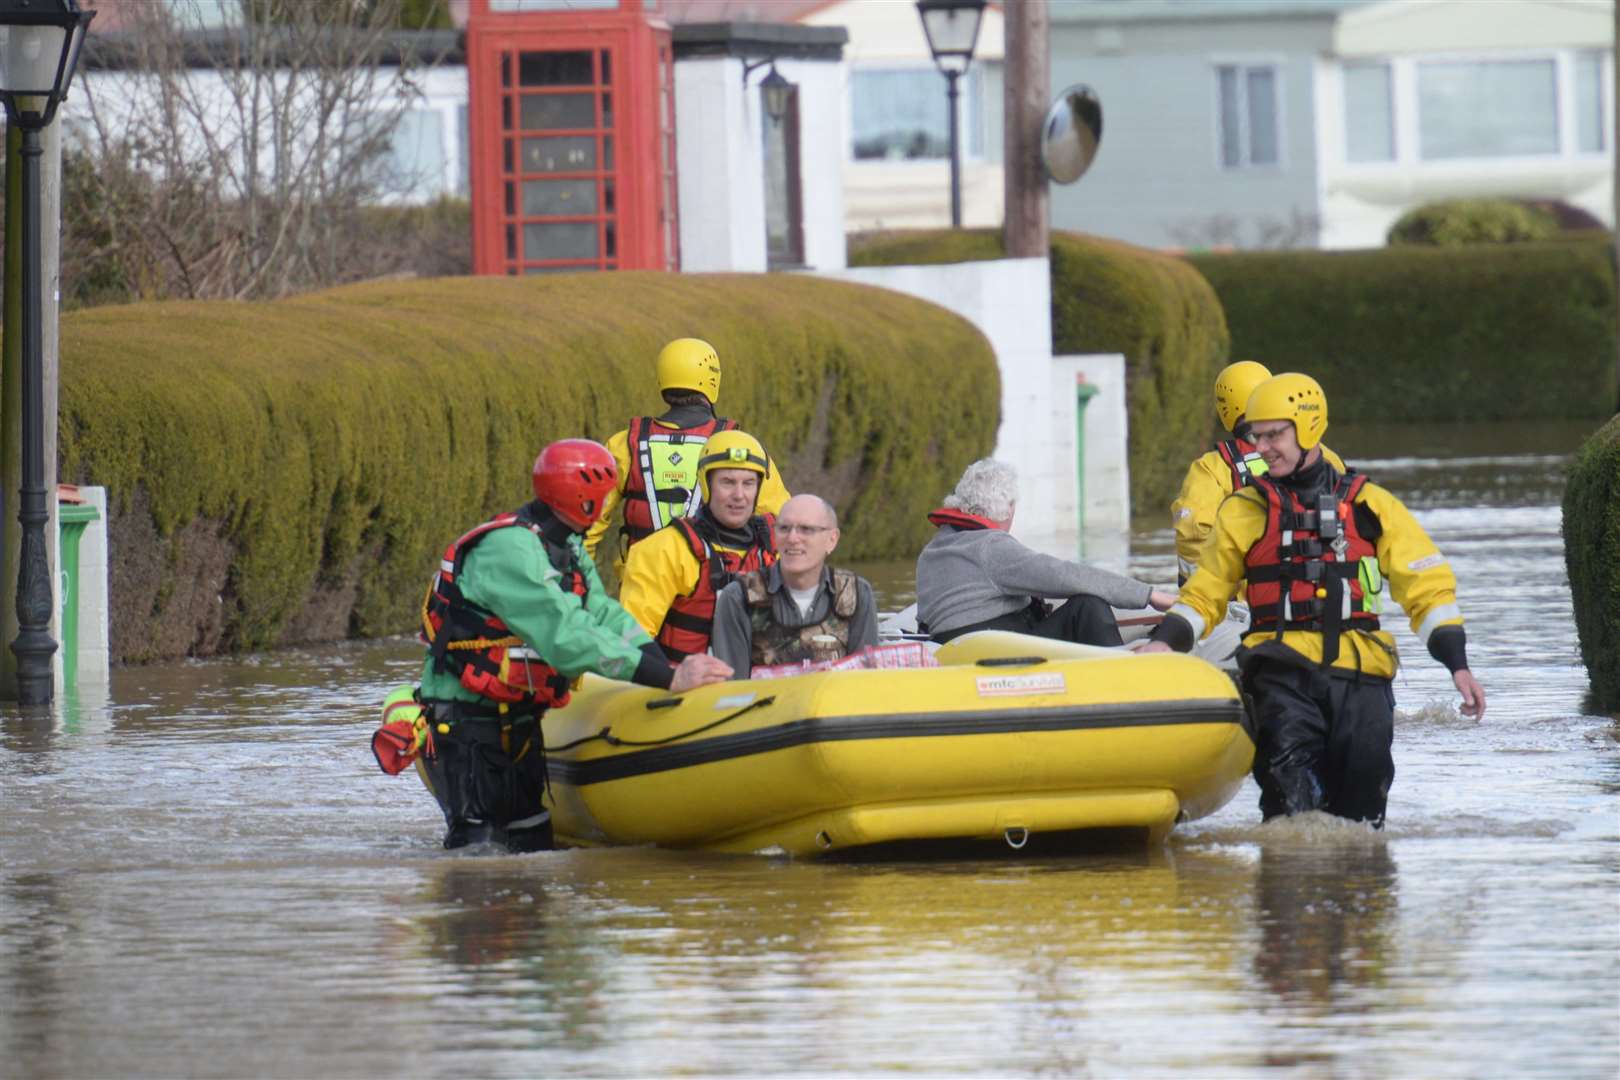 People are being shipped to safety after the flooding around Little Venice and Teapot Island. Picture: Chris Davey